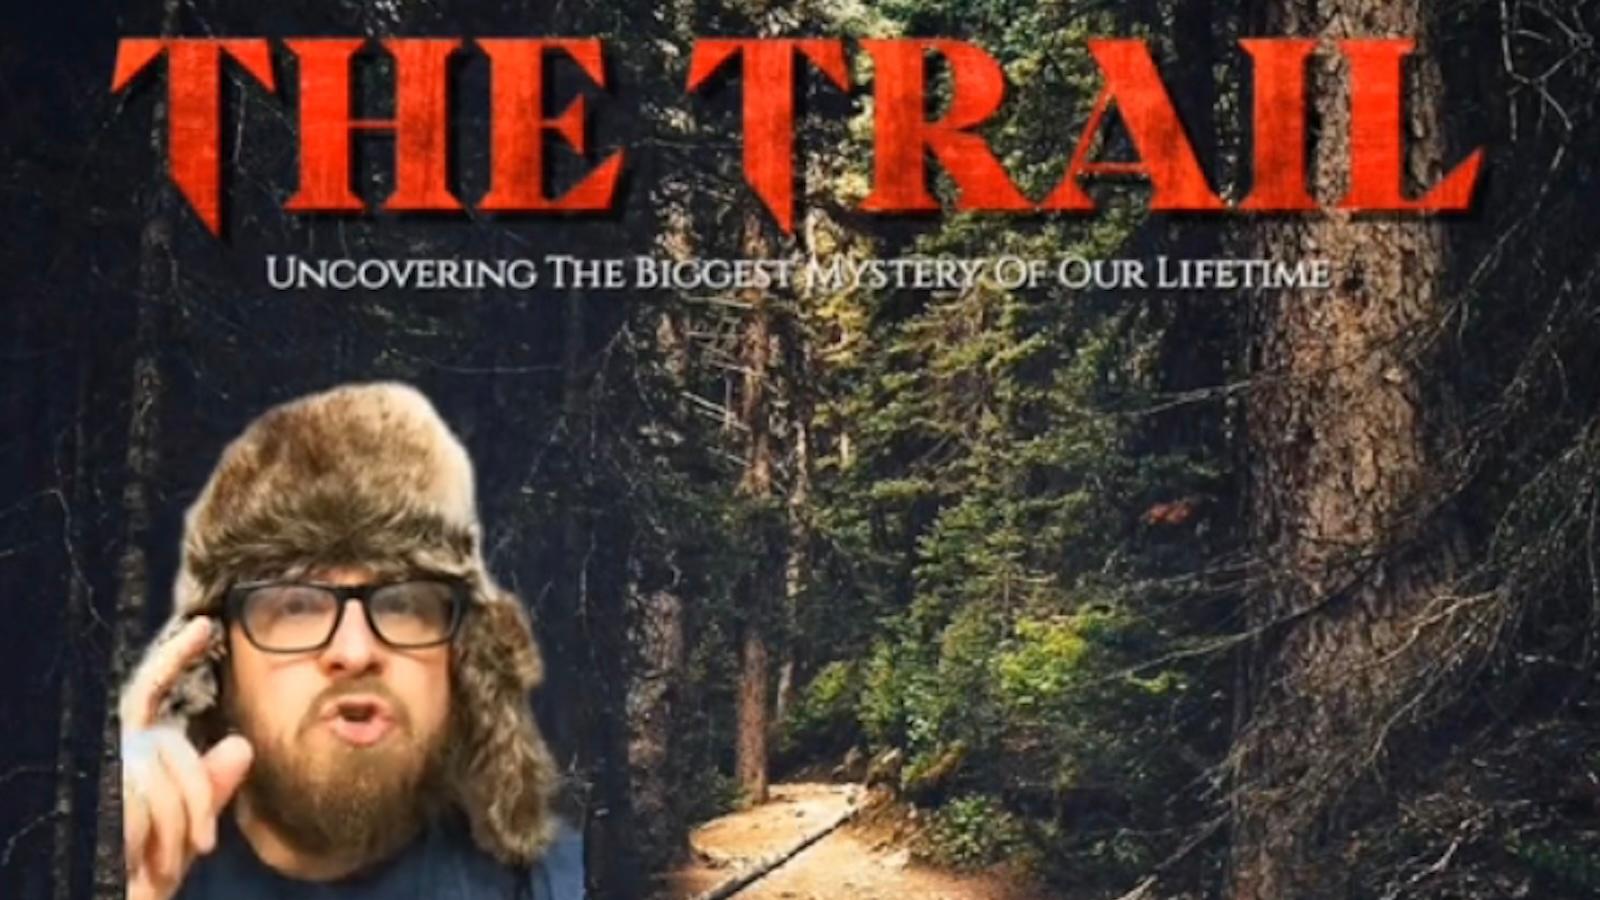 Poster for fake documentary The Trail